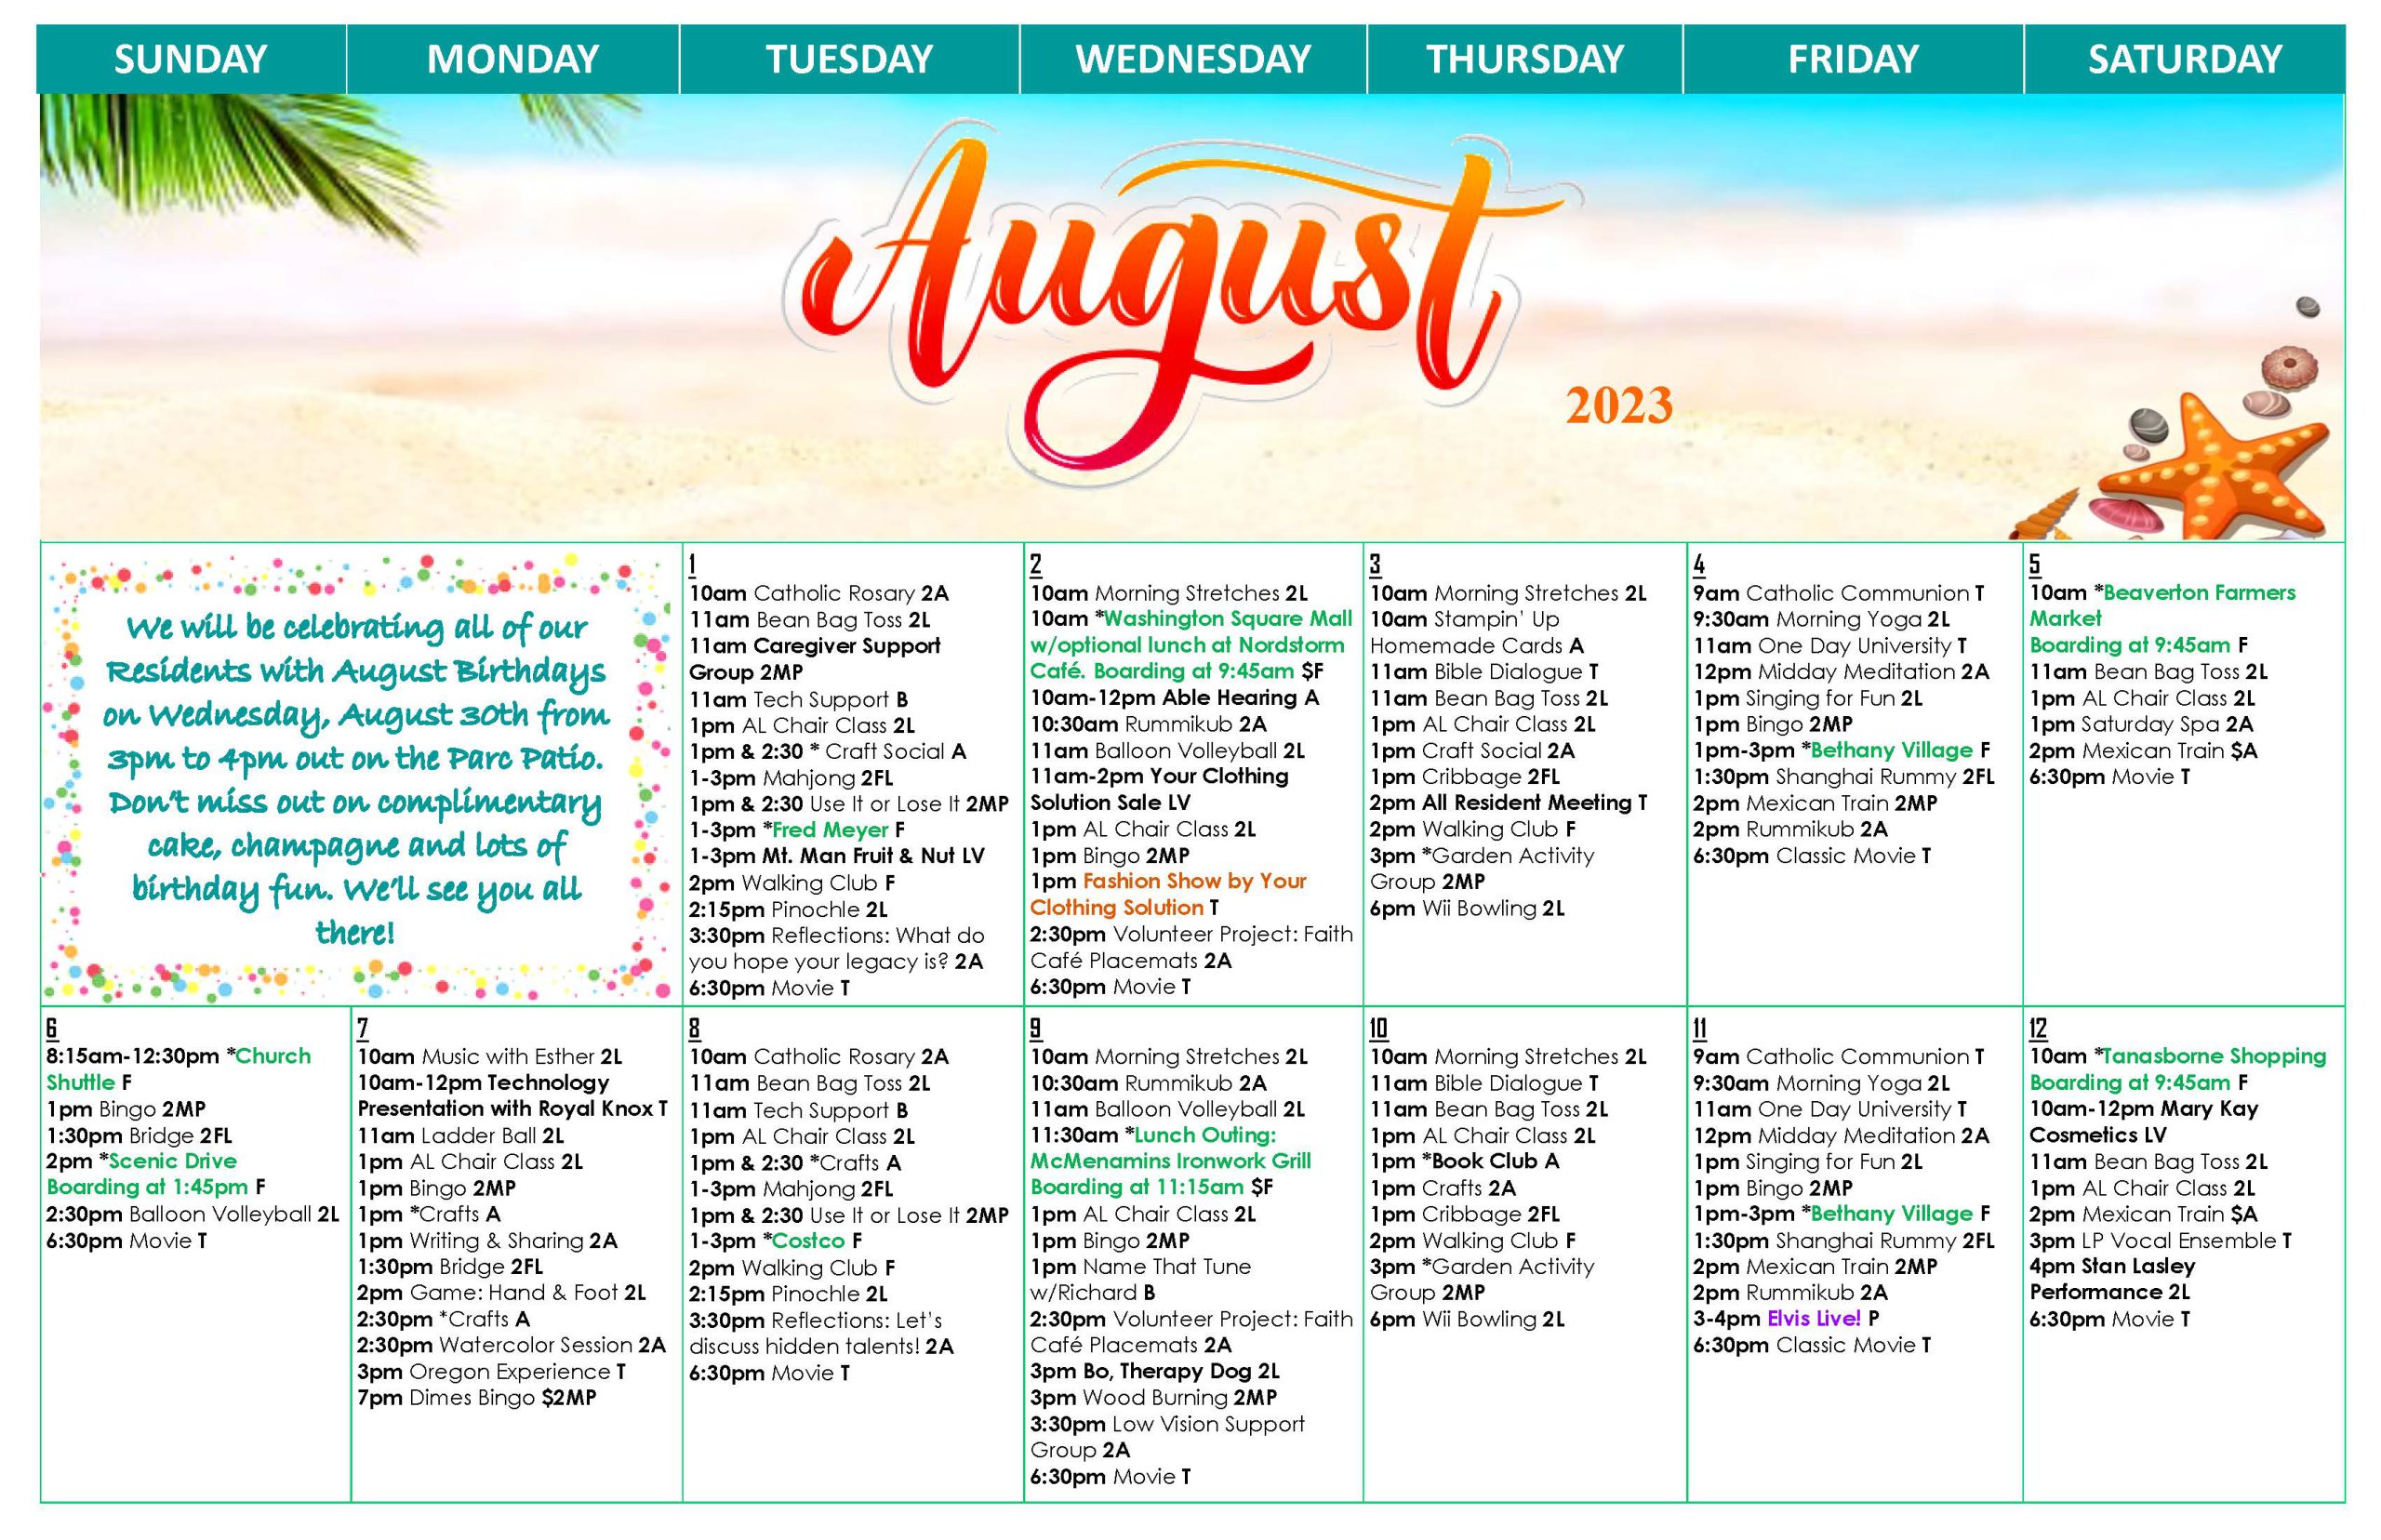 Community Activities and Events at Laurel Parc Senior Living August 2023